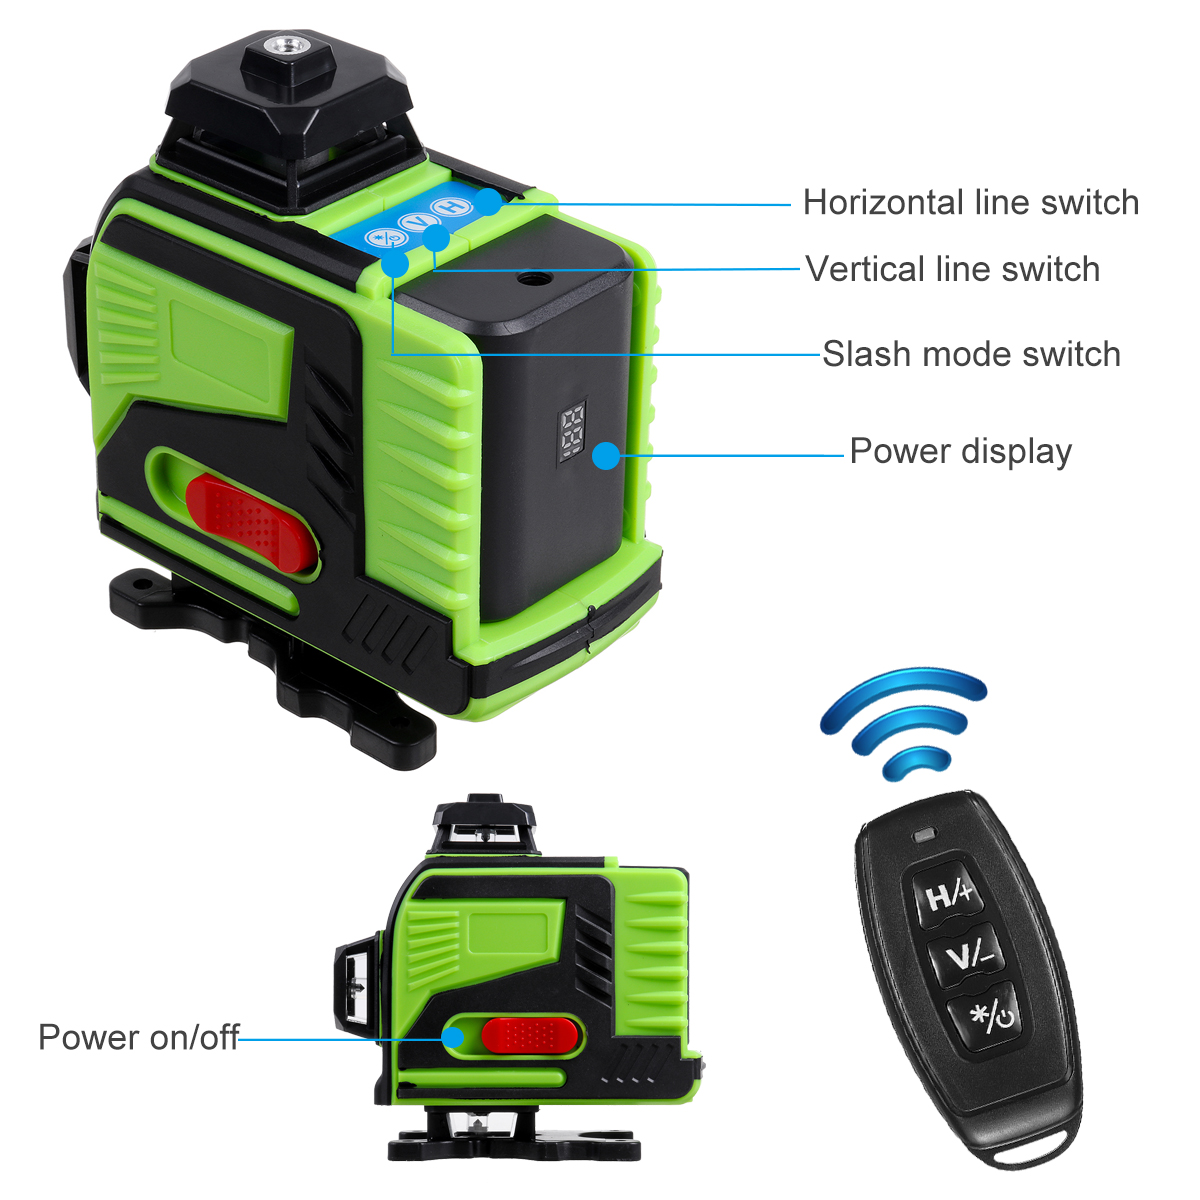 4D-16-Lines-Green-Light-Laser-Levels--360deg-Self-Rotary-Leveling-Measure-Tools-with-2PCS-Lithium-Ba-1941453-6